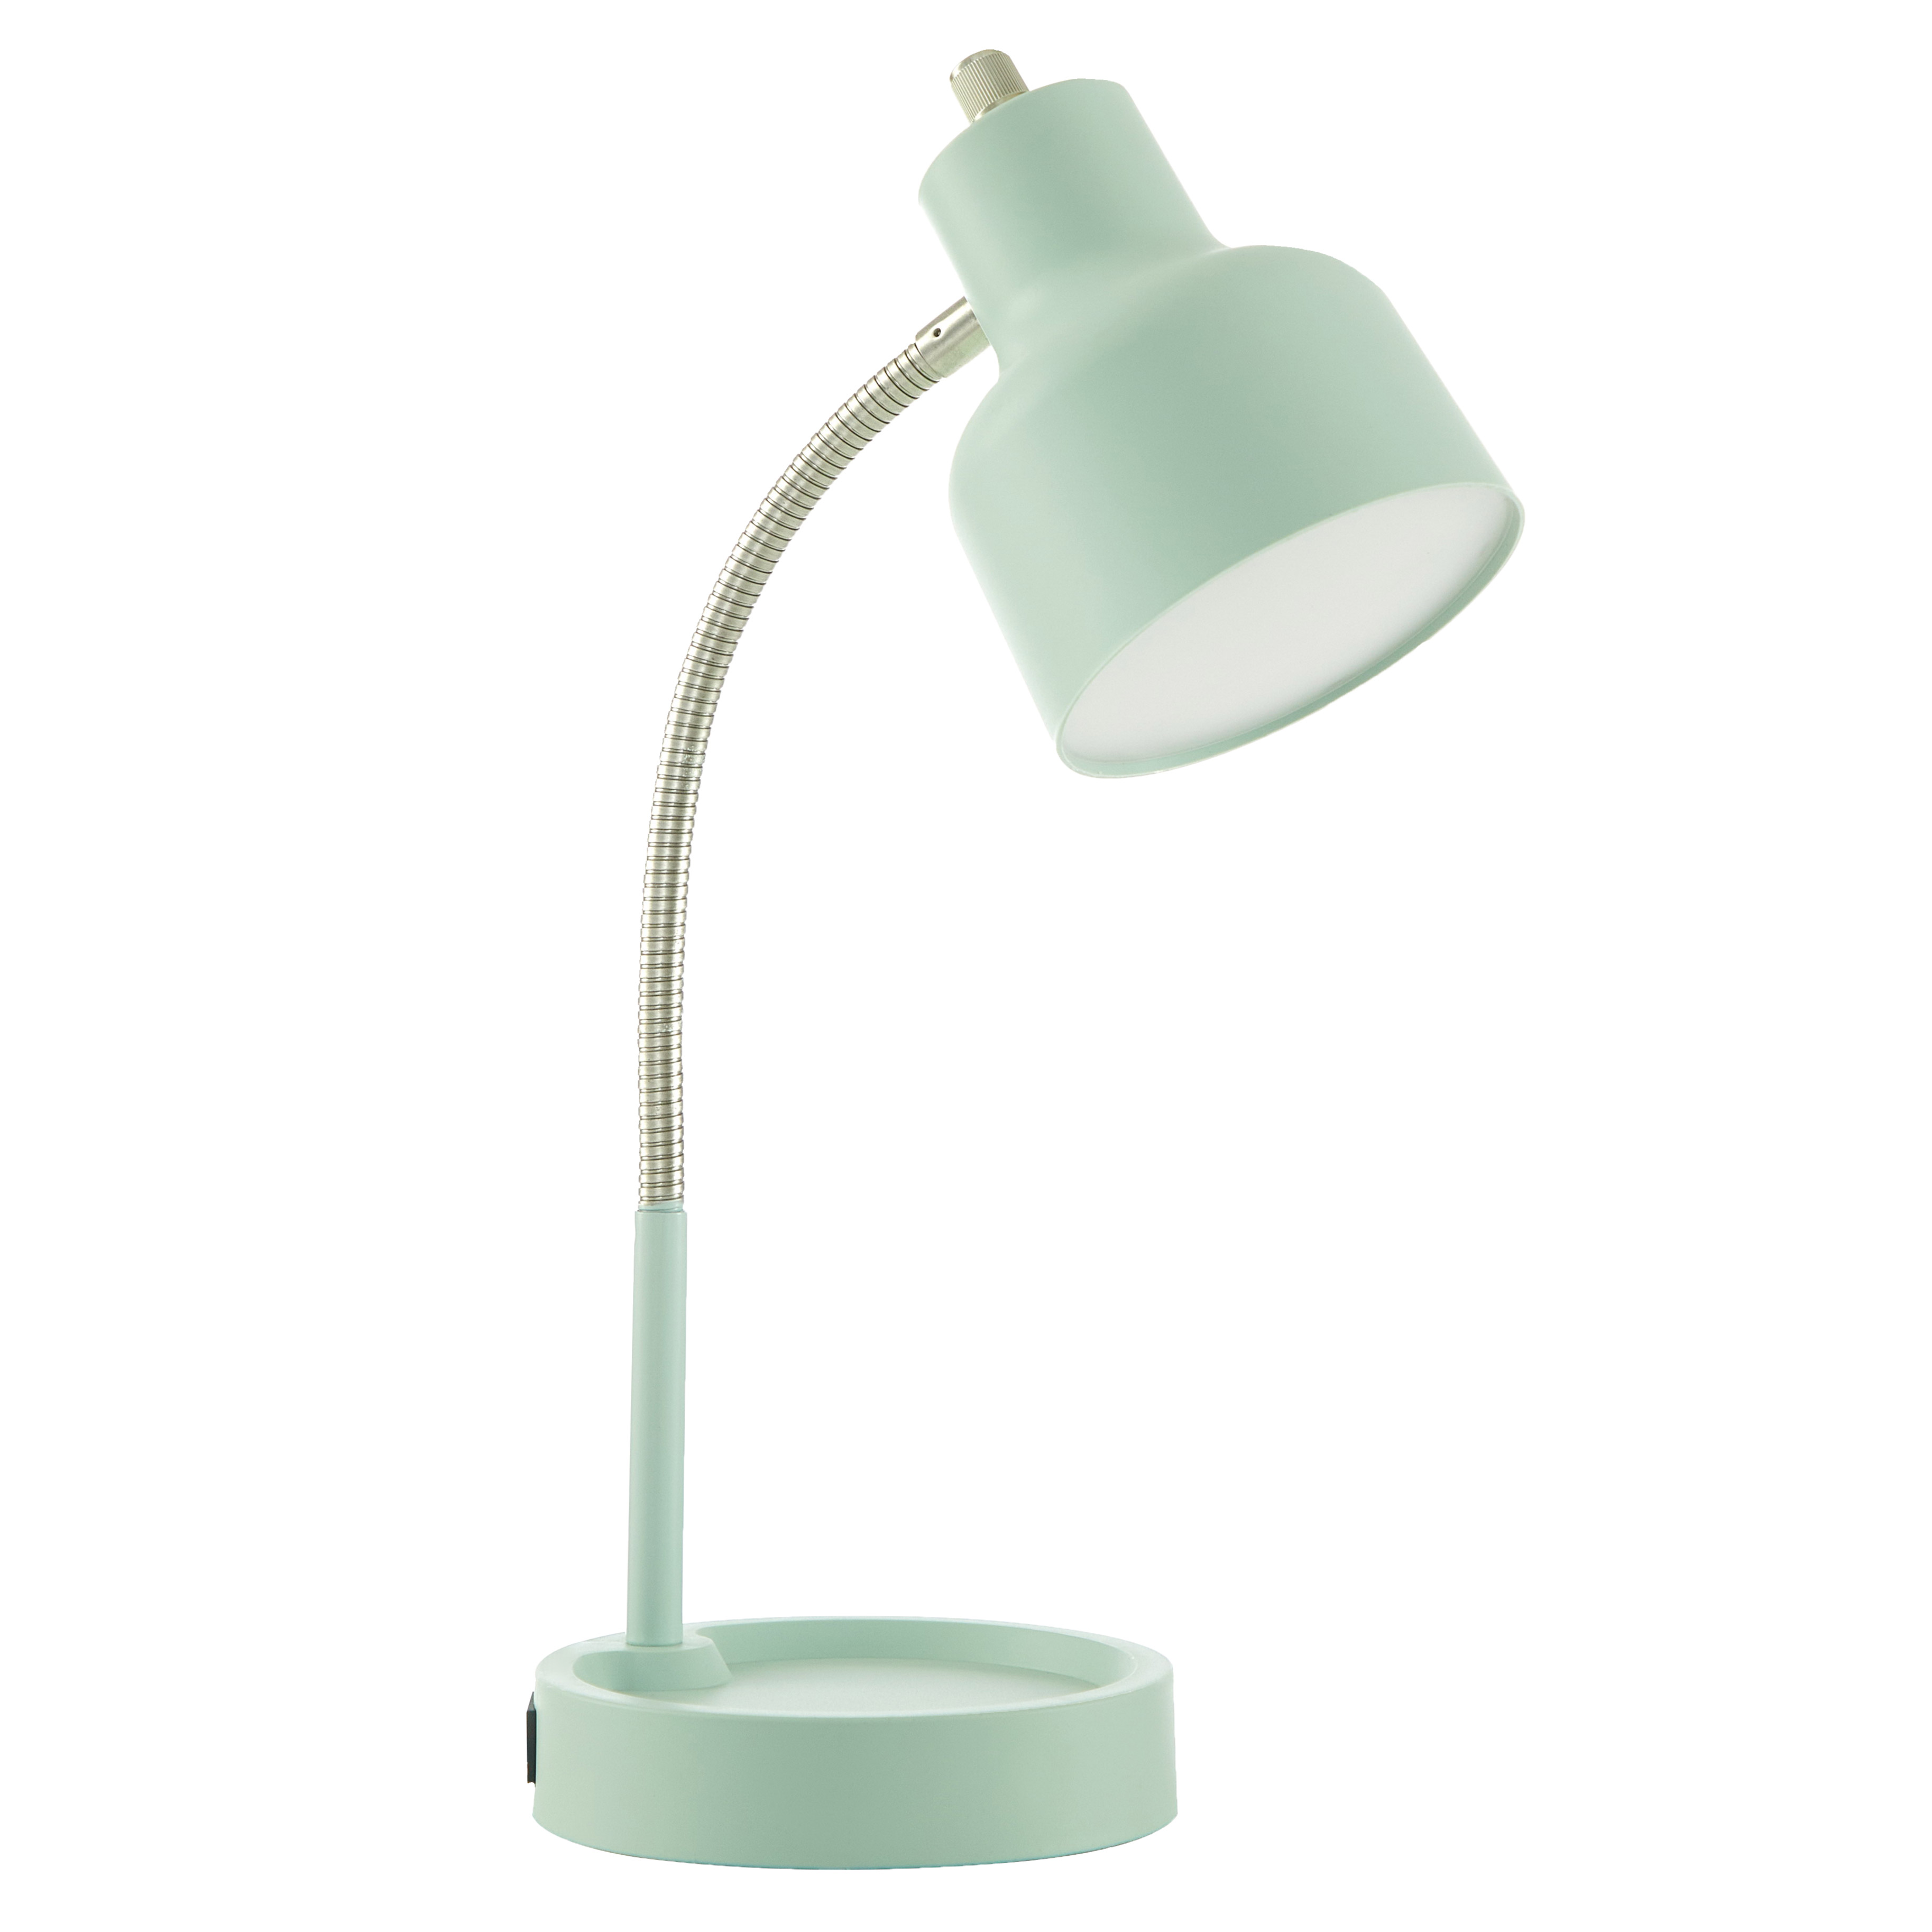 Mainstays LED Desk Lamp with Catch-All Base & AC Outlet, Matte Mint Green - image 1 of 11